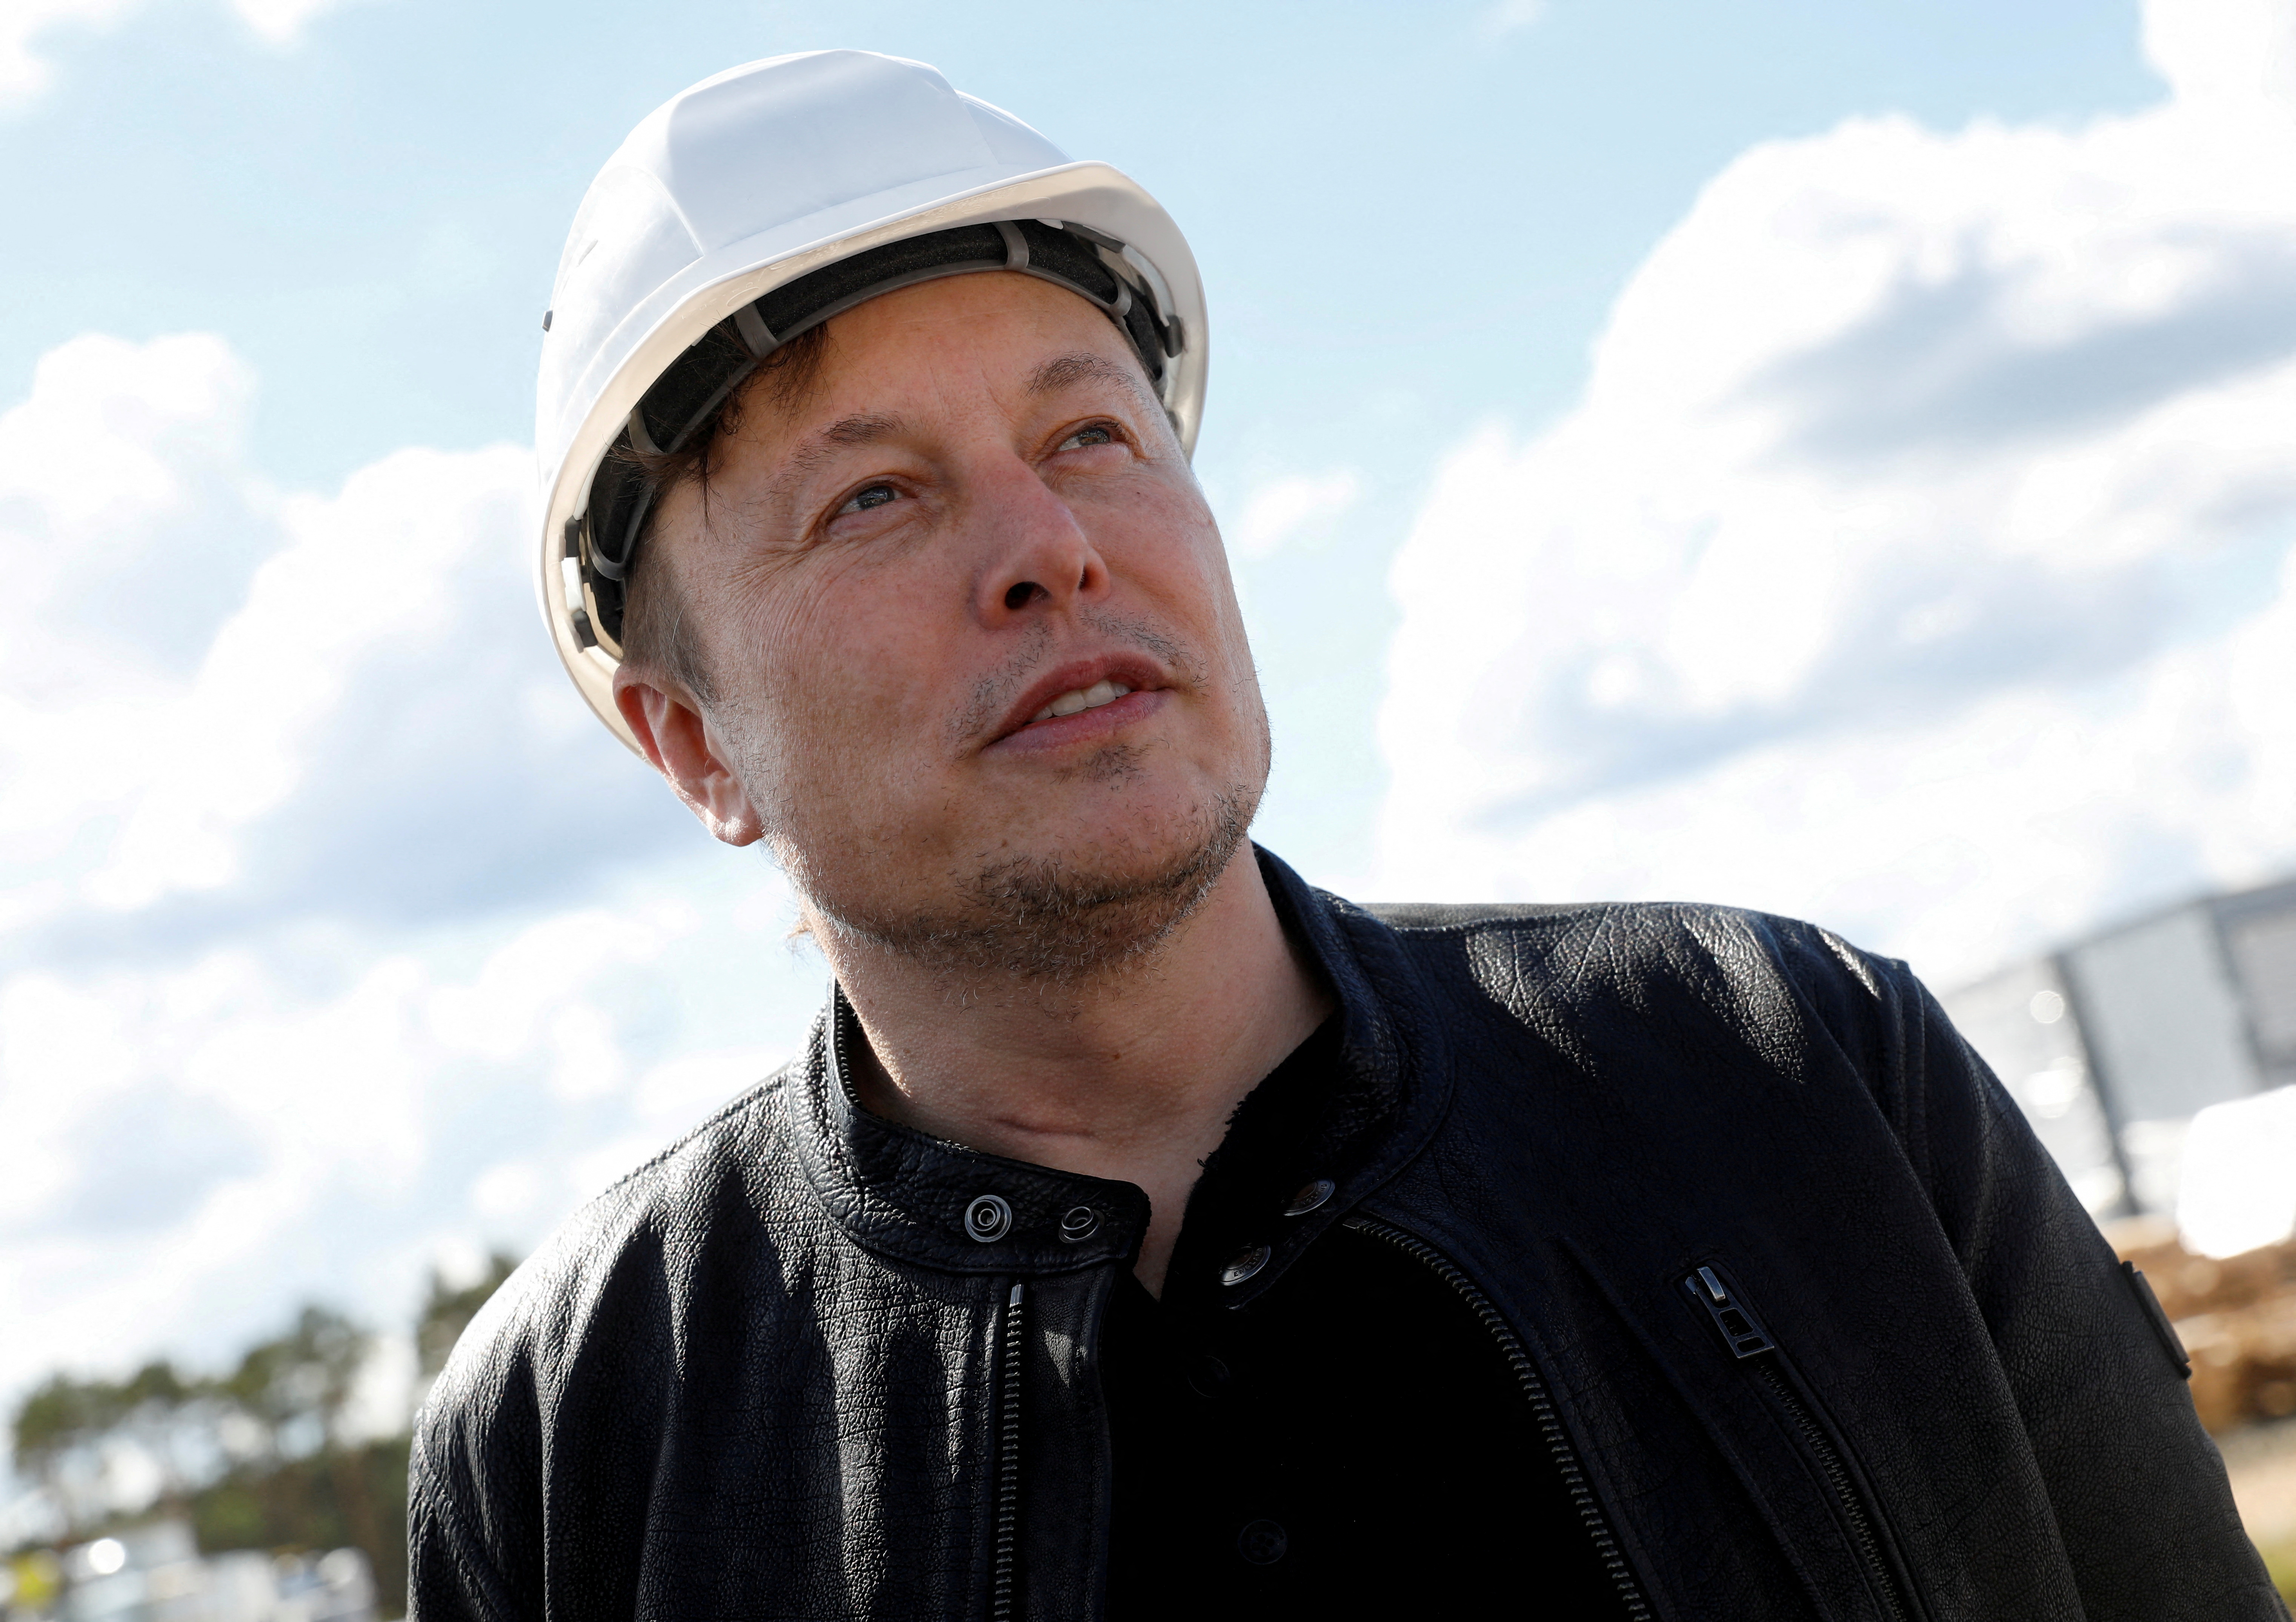 SpaceX founder and Tesla CEO Elon Musk looks on as he visits the construction site of Tesla's gigafactory in Gruenheide, near Berlin, Germany, May 17, 2021. REUTERS/Michele Tantussi